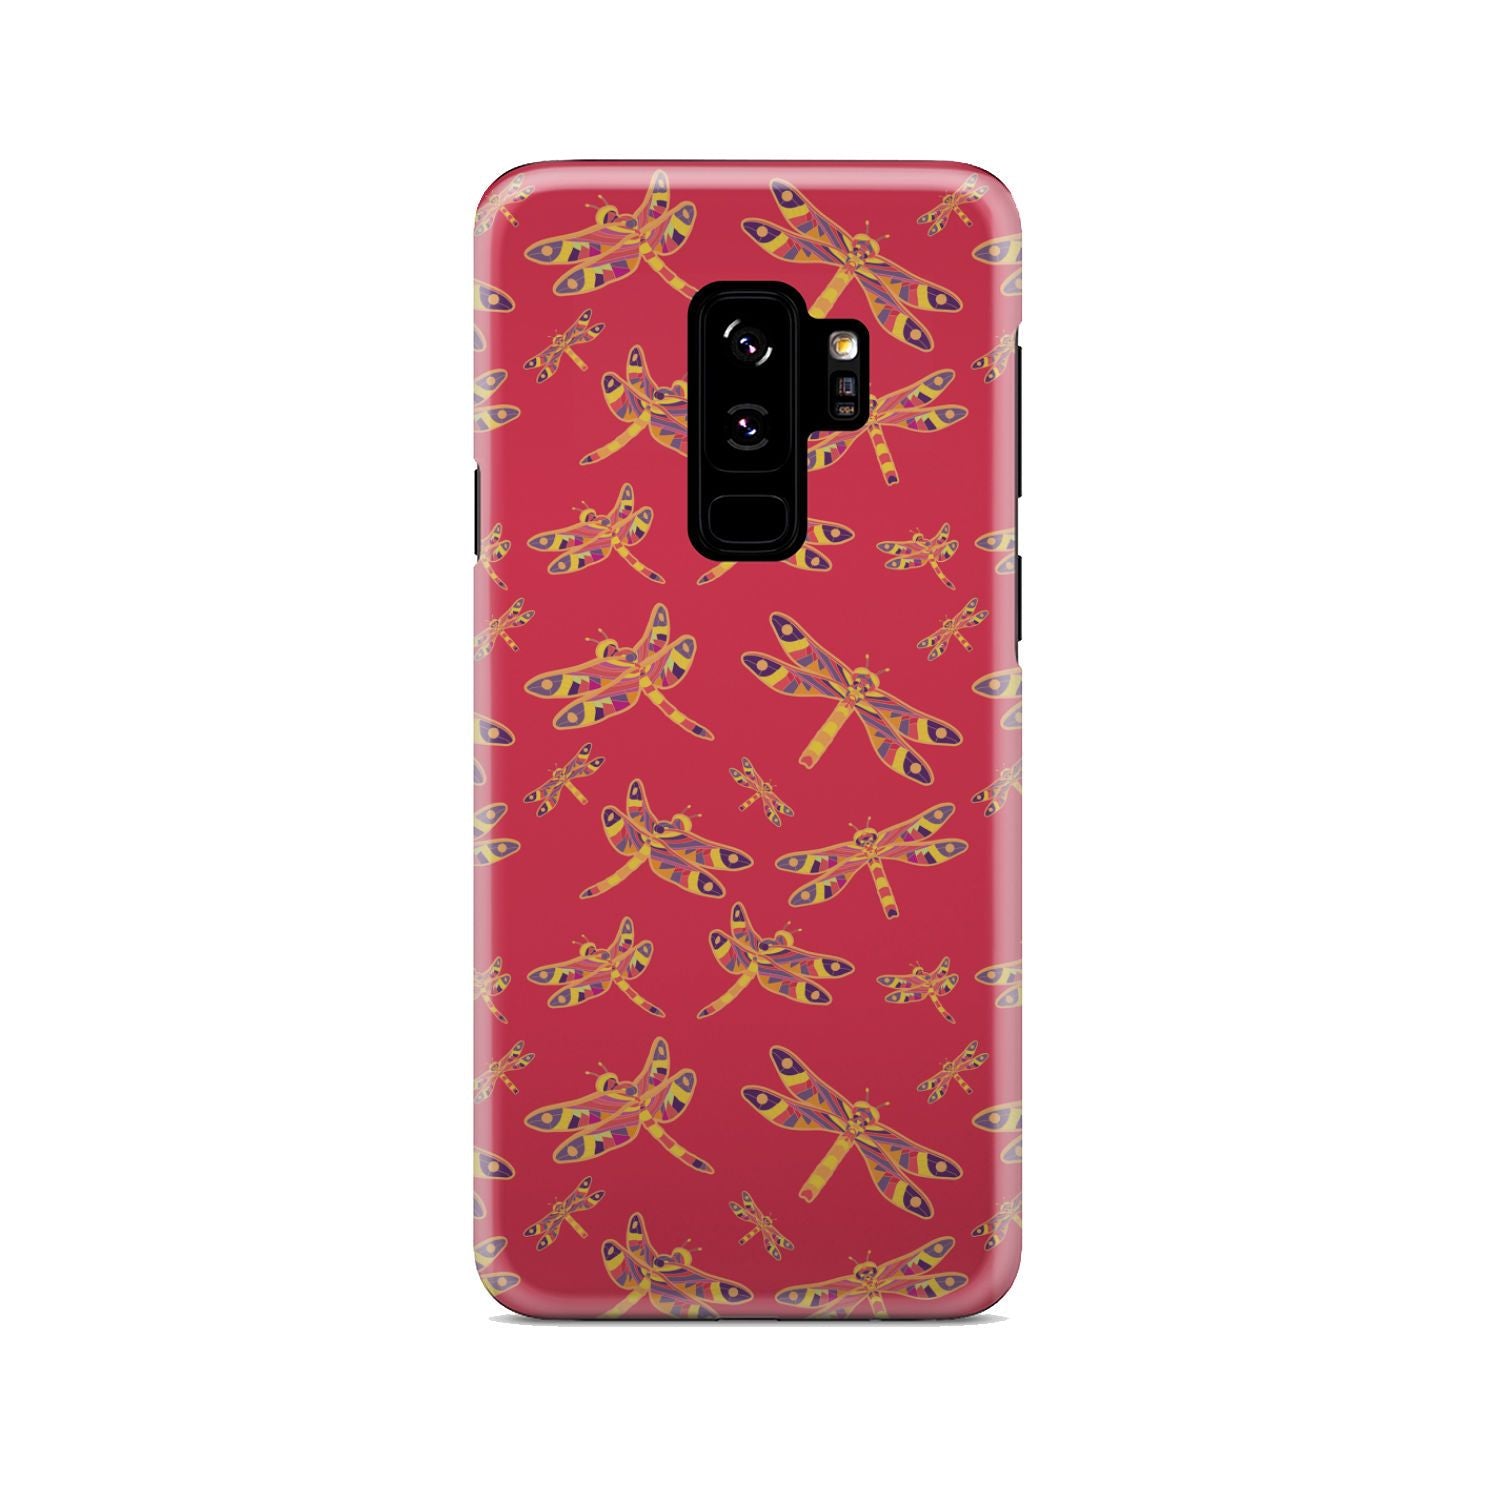 Gathering Rouge Phone Case Phone Case wc-fulfillment Samsung Galaxy S9 Plus 